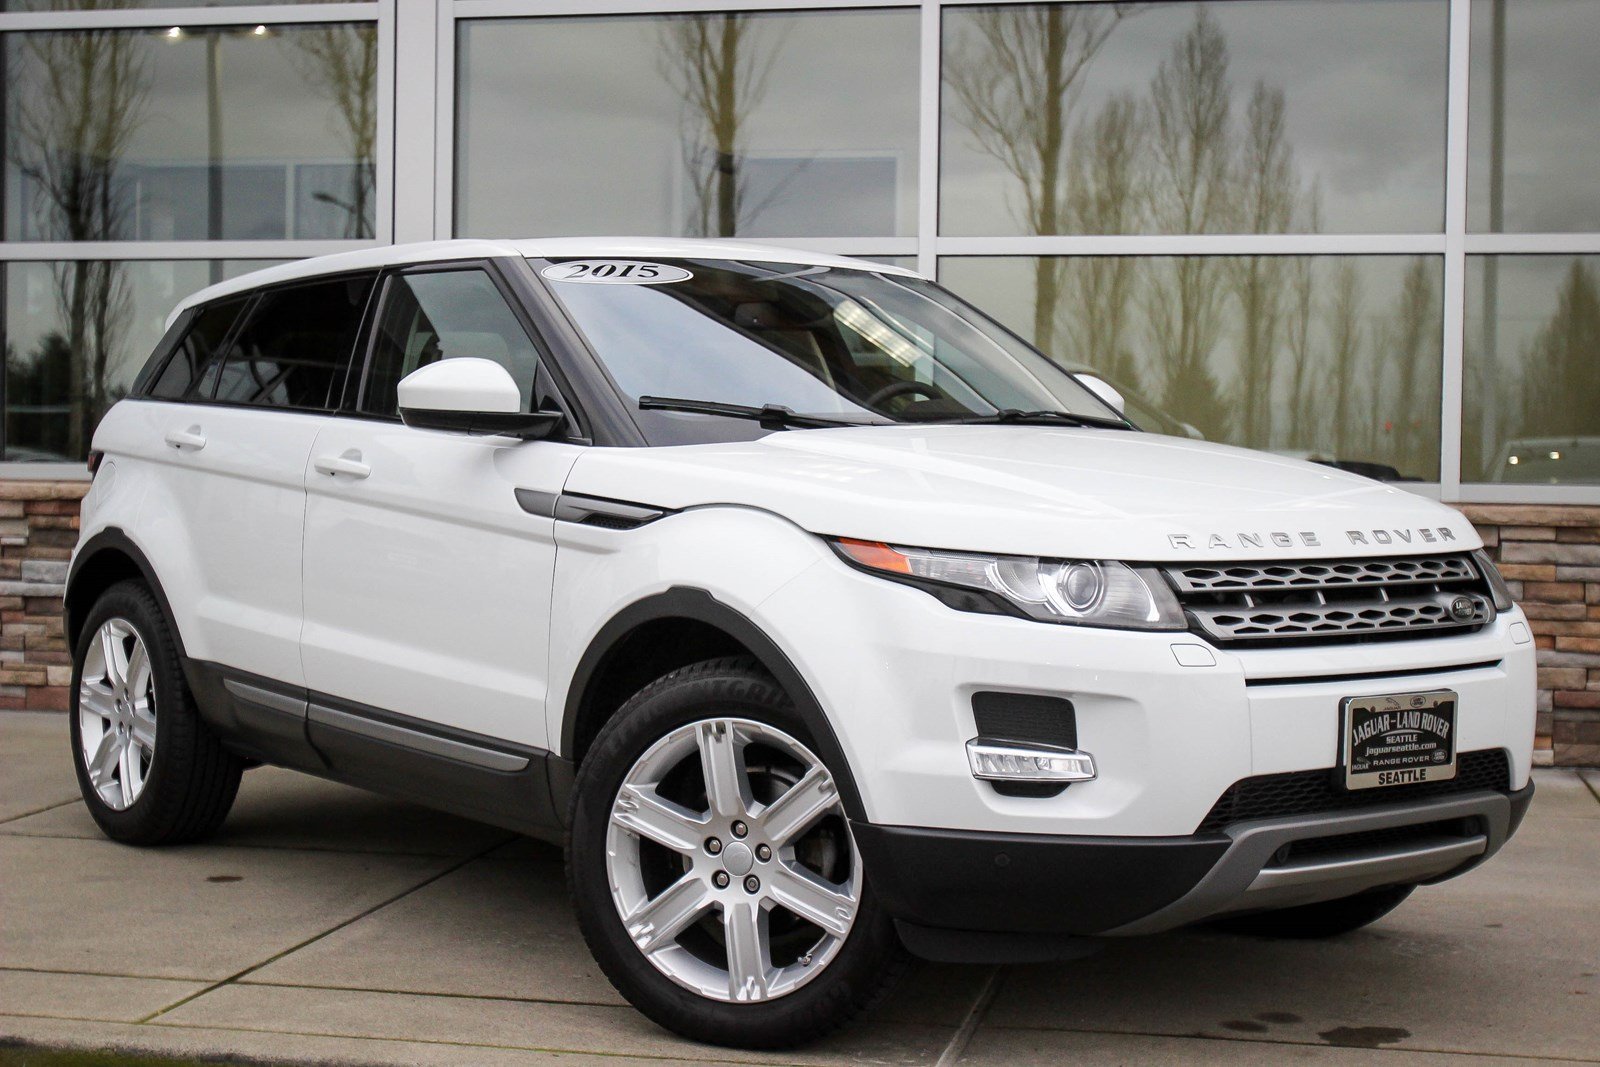 Certified Pre-Owned 2015 Land Rover Range Rover Evoque Pure Plus Sport